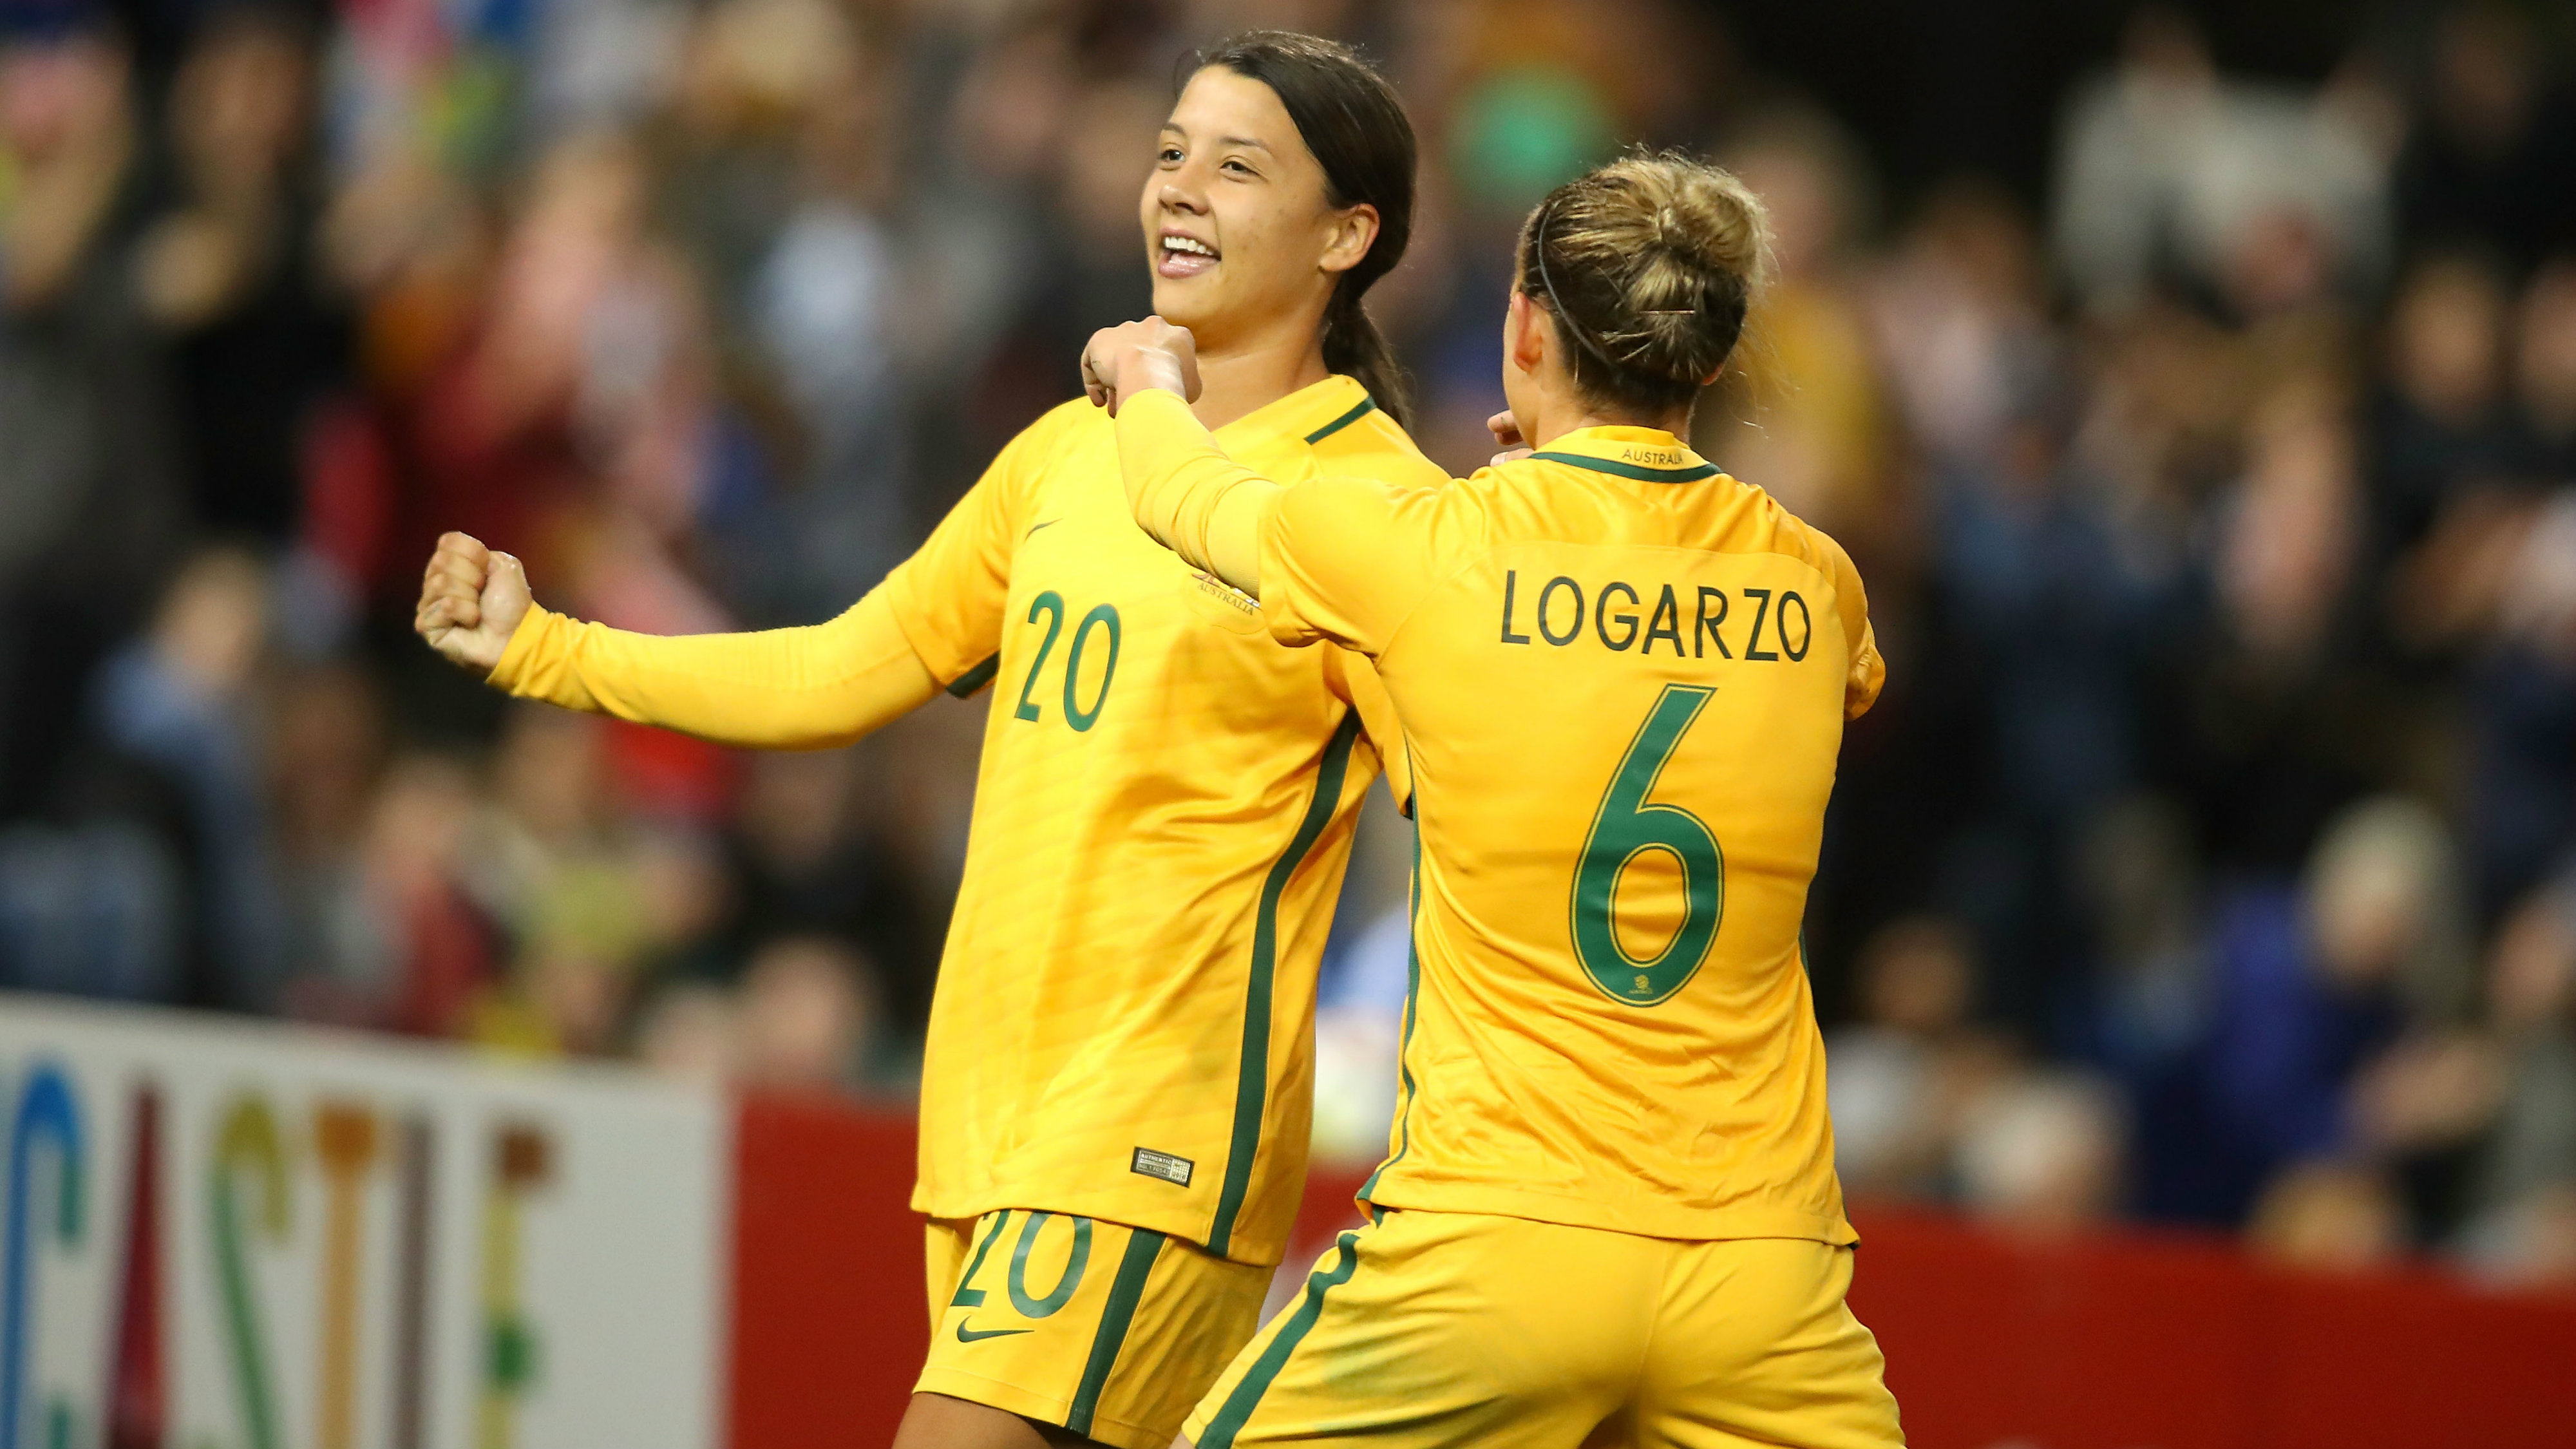 Tickets for the Westfield Matildas' clashes with China are now on sale.